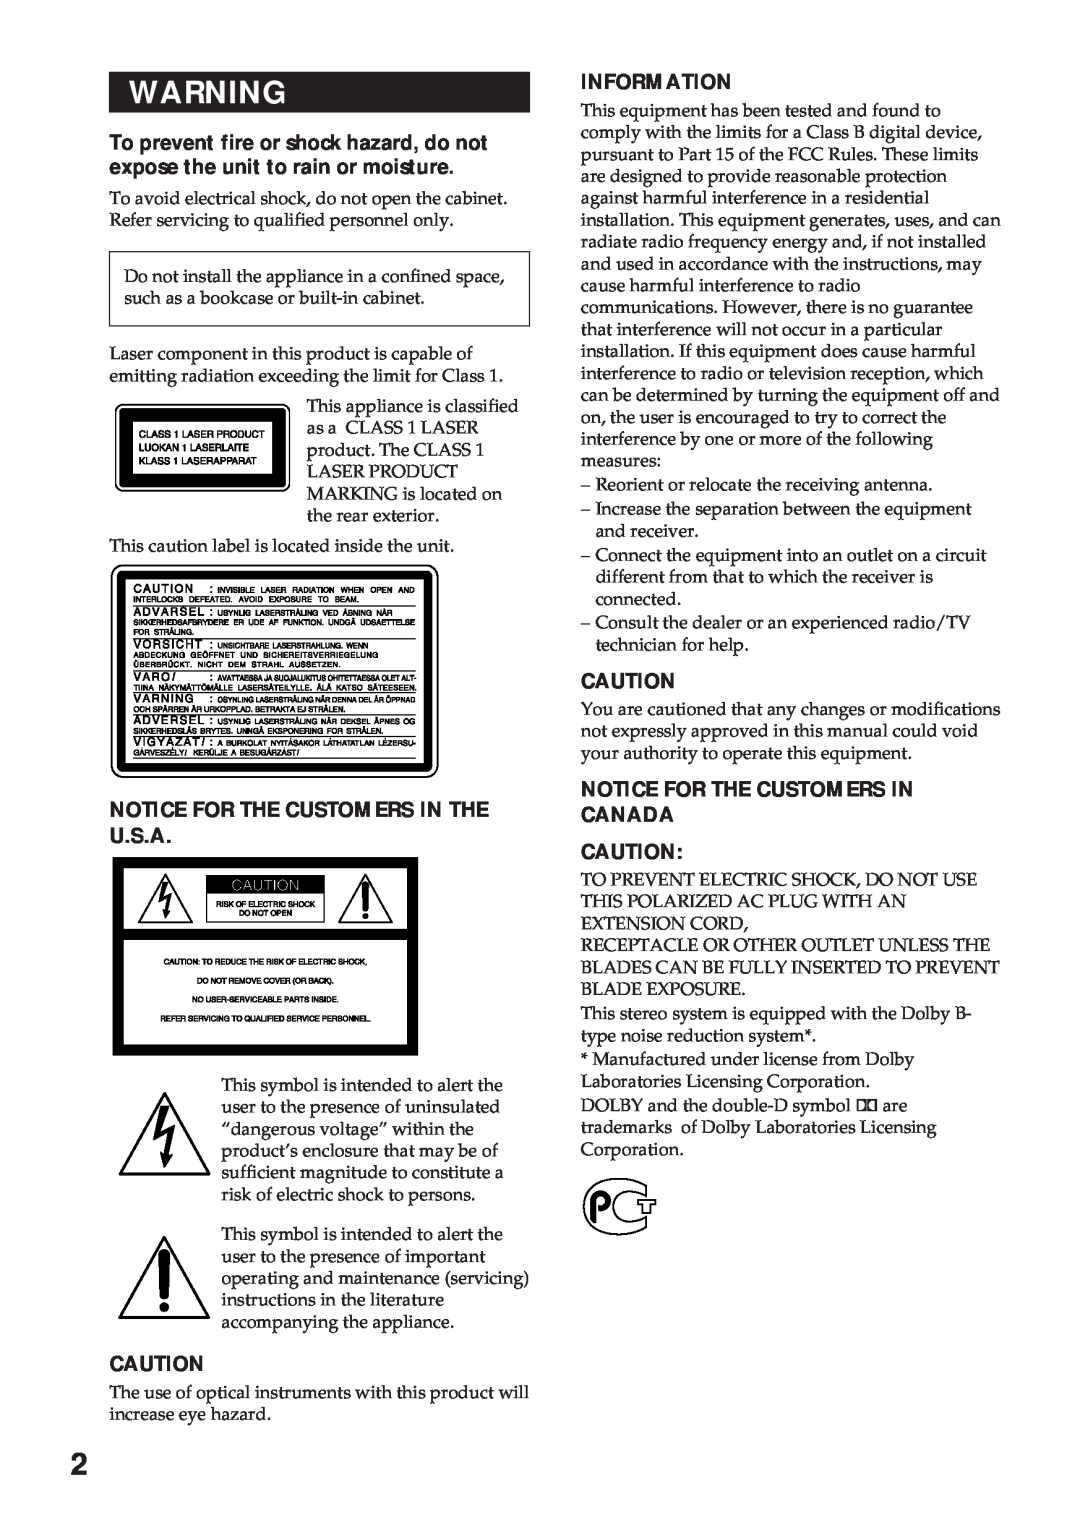 Sony MHC-RX900 manual Notice For The Customers In The U.S.A, Information, Notice For The Customers In Canada 